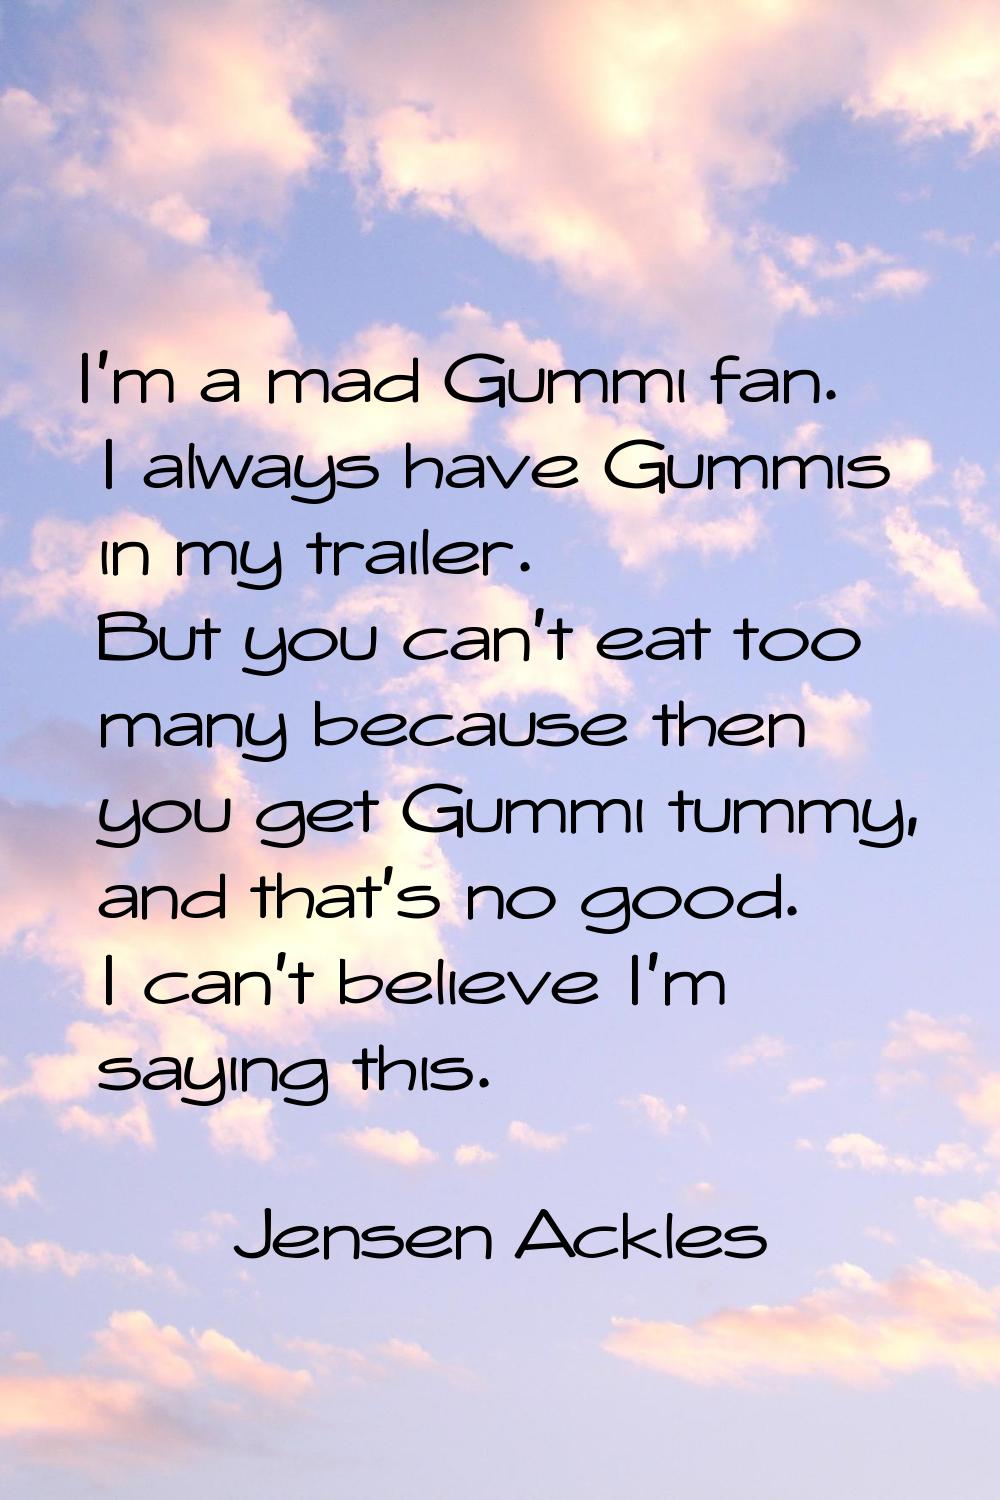 I'm a mad Gummi fan. I always have Gummis in my trailer. But you can't eat too many because then yo